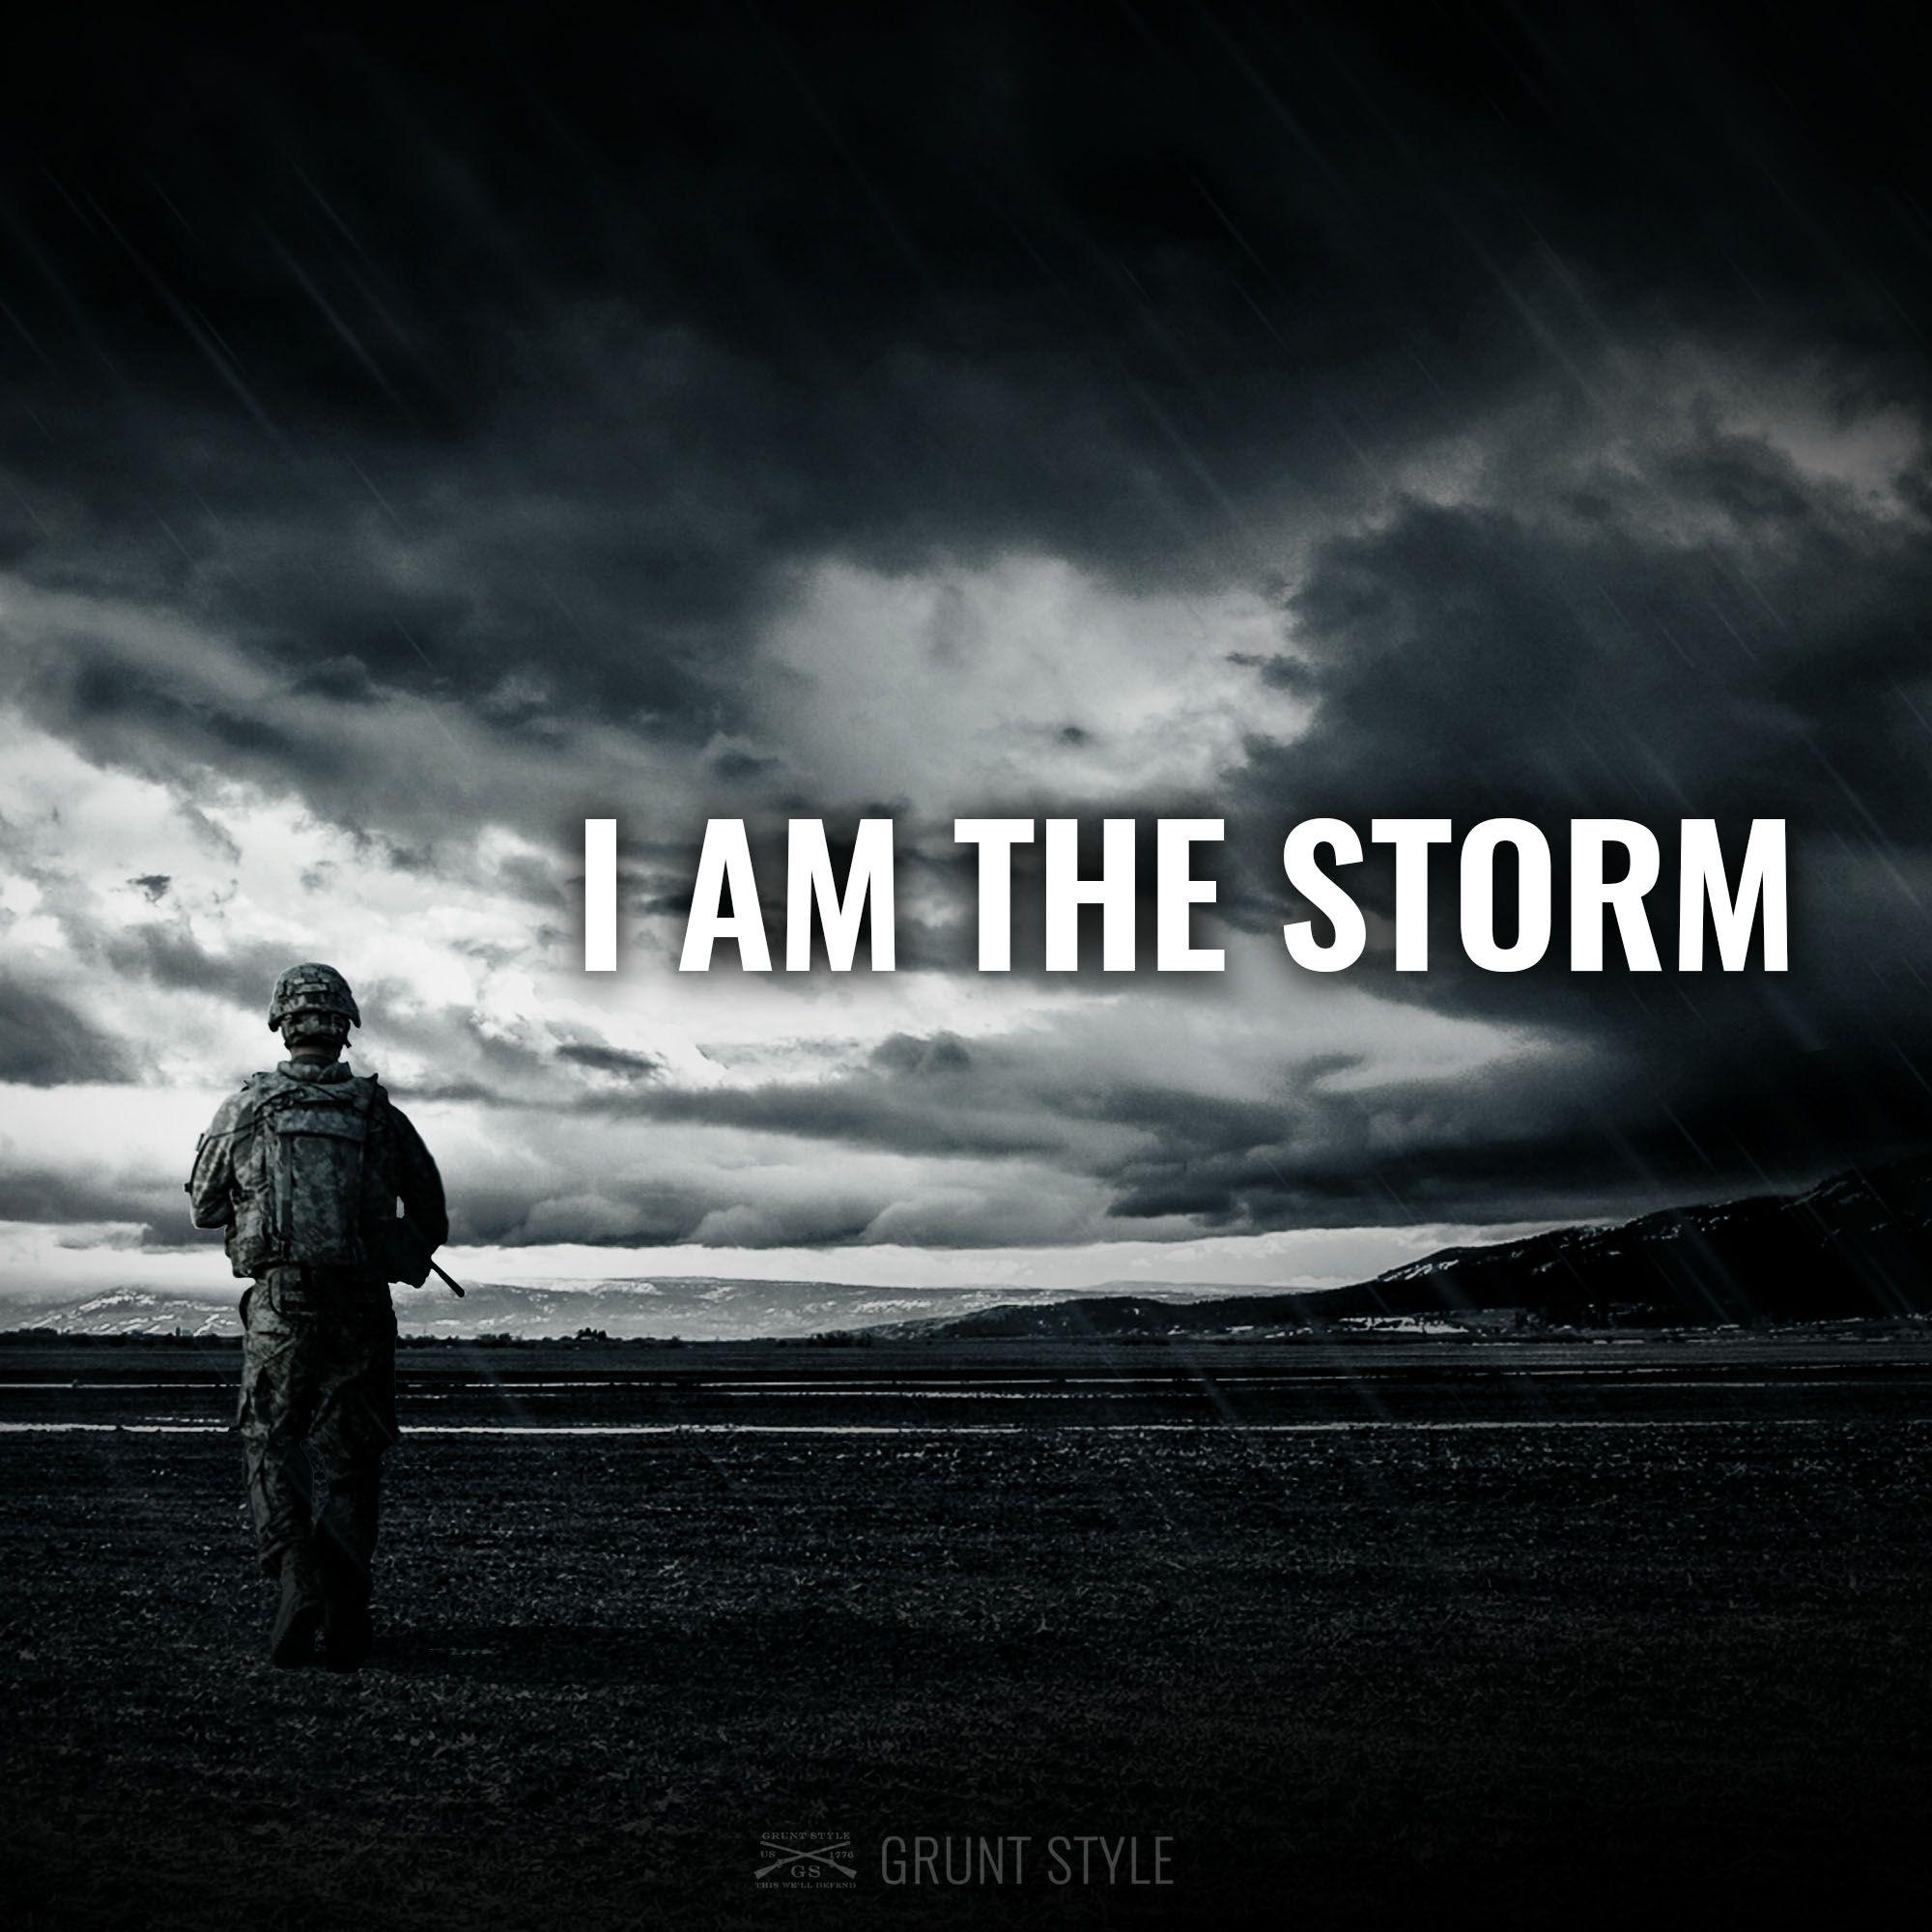 I AM THE STORM #motivation #military #america. Army quotes